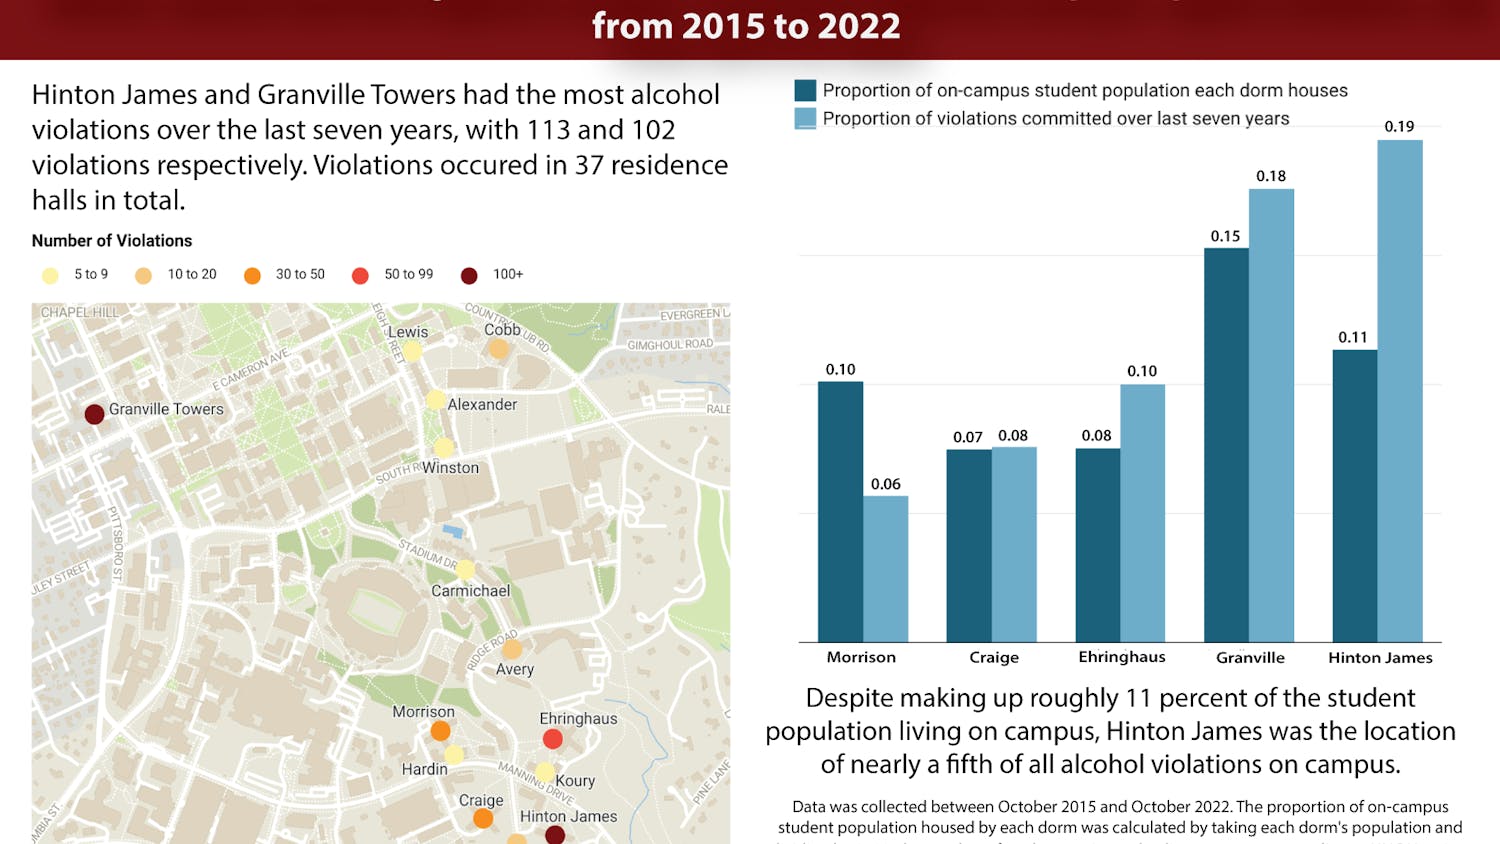 Hinton James had the highest number of alcohol offenses and per capita violation rate from 2015 to 2022